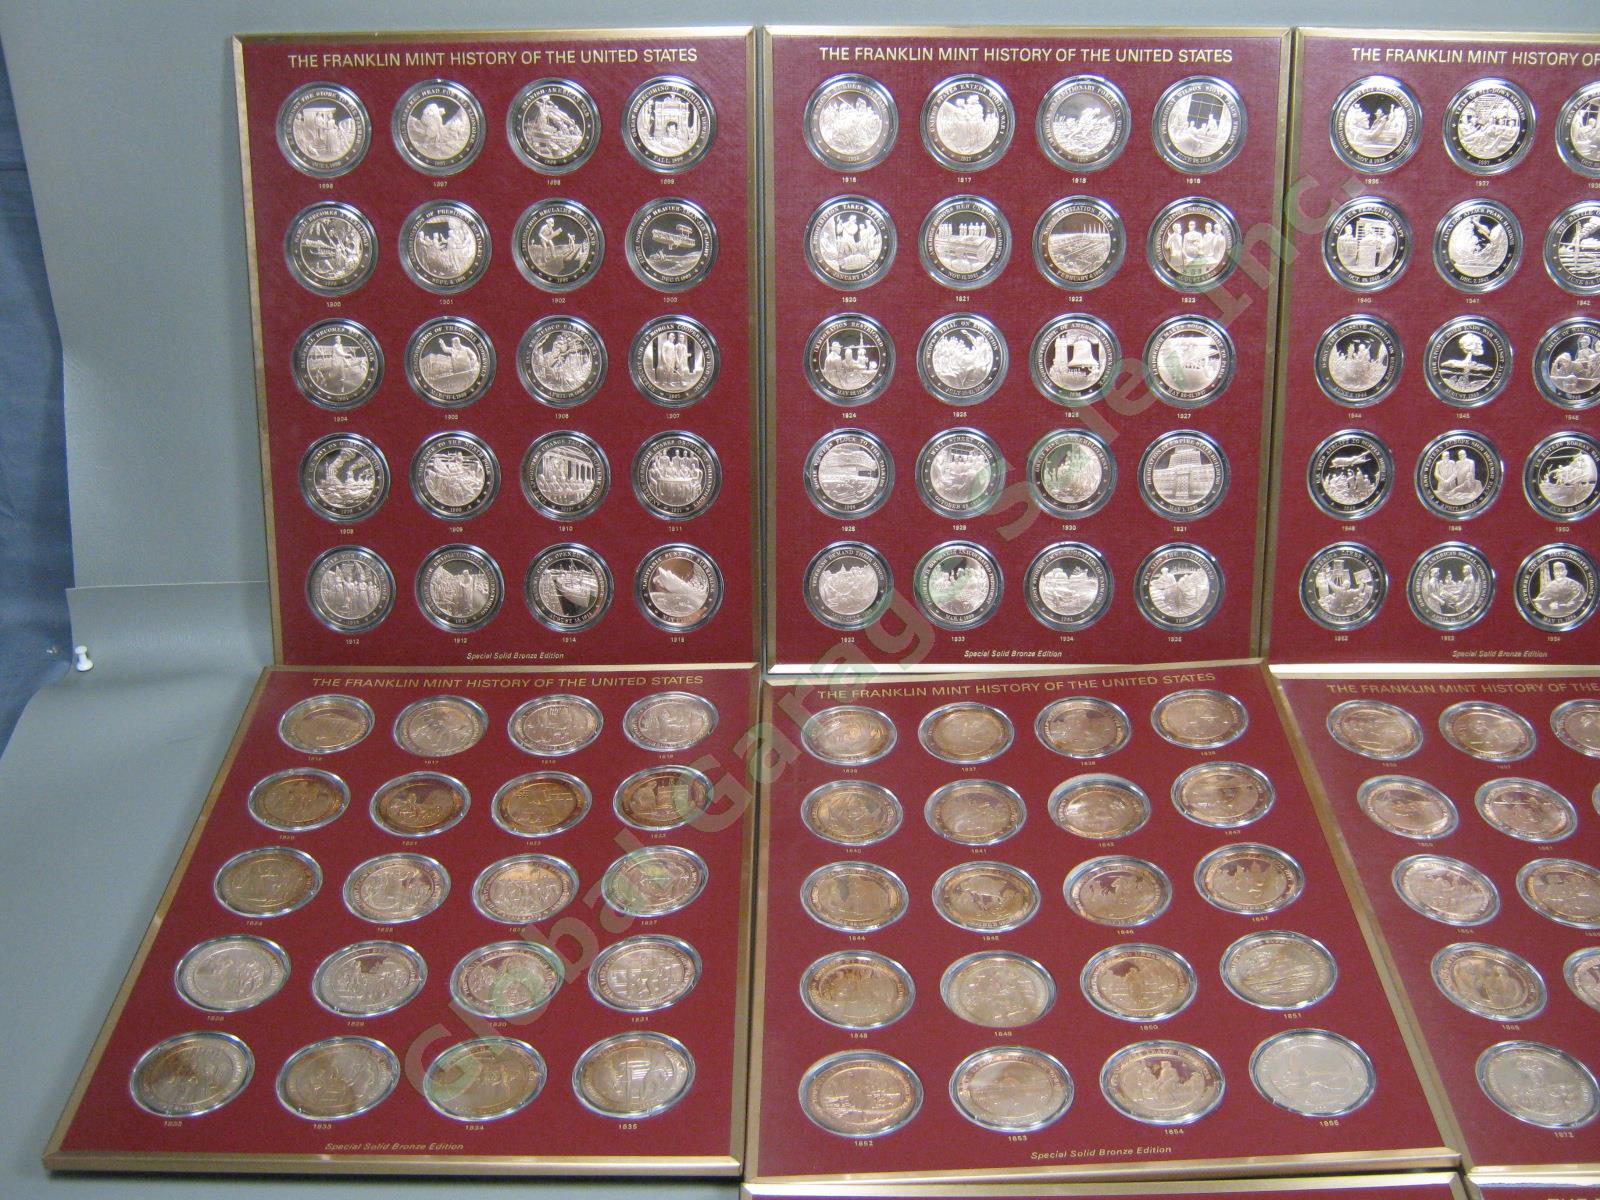 202 Franklin Mint 1776-1975 History Of The United State Solid Bronze Medal Coins 3